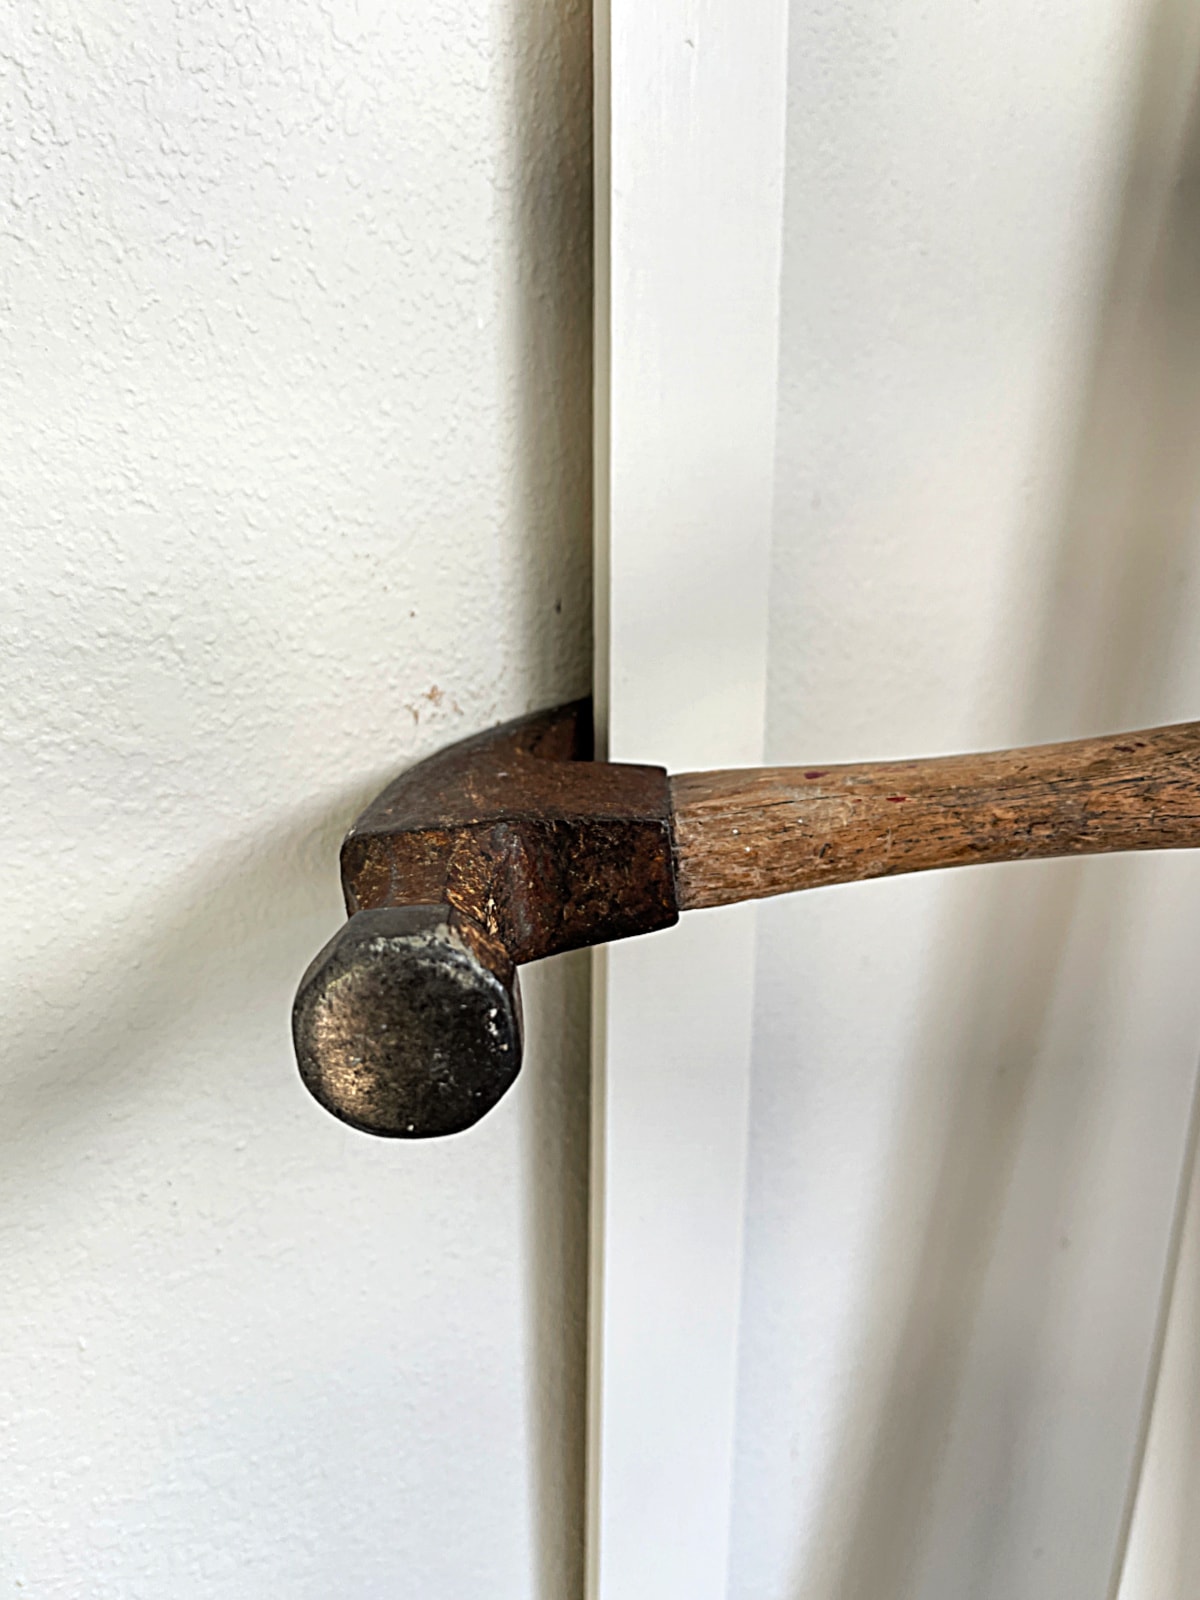 hammer removing wood trim from wall